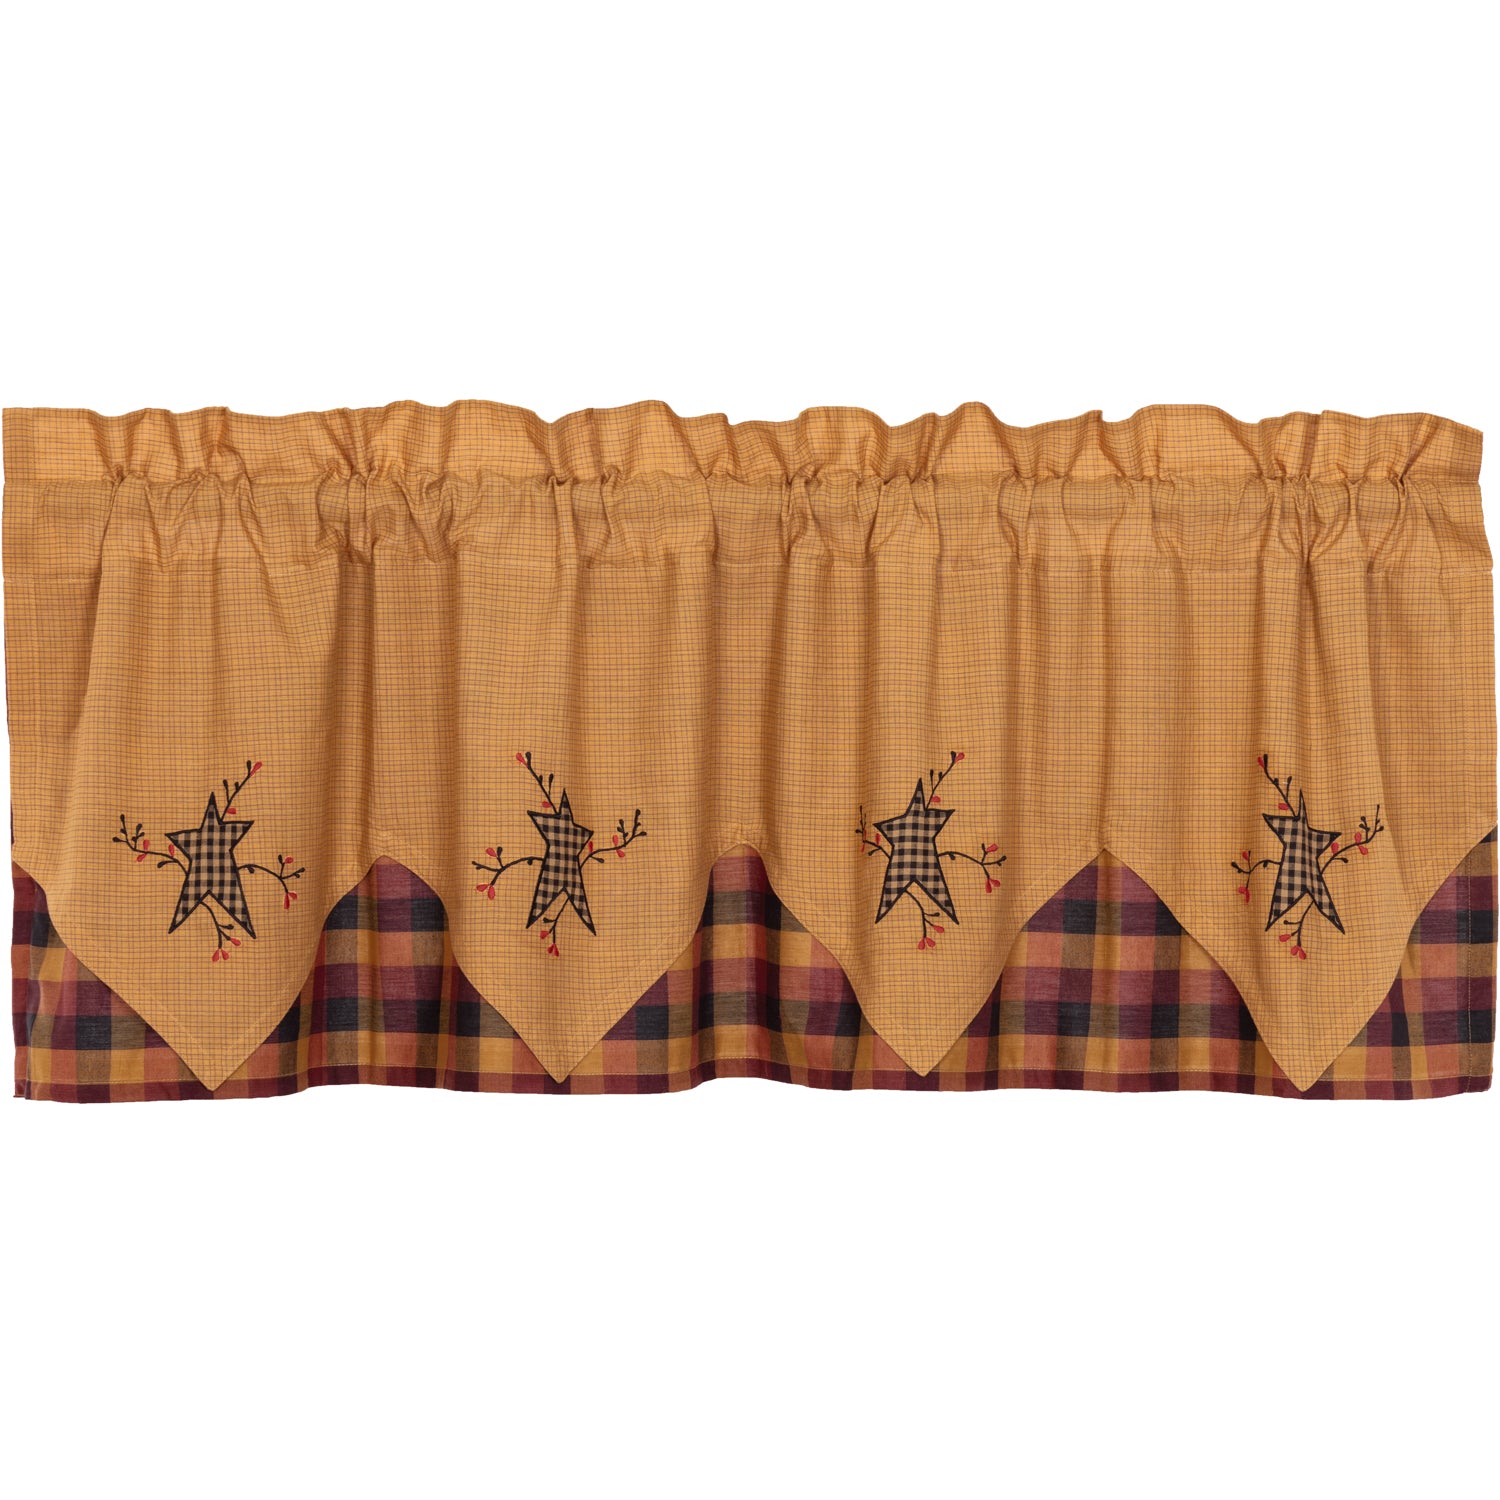 51877-Heritage-Farms-Primitive-Star-and-Pip-Valance-Layered-20x60-image-6